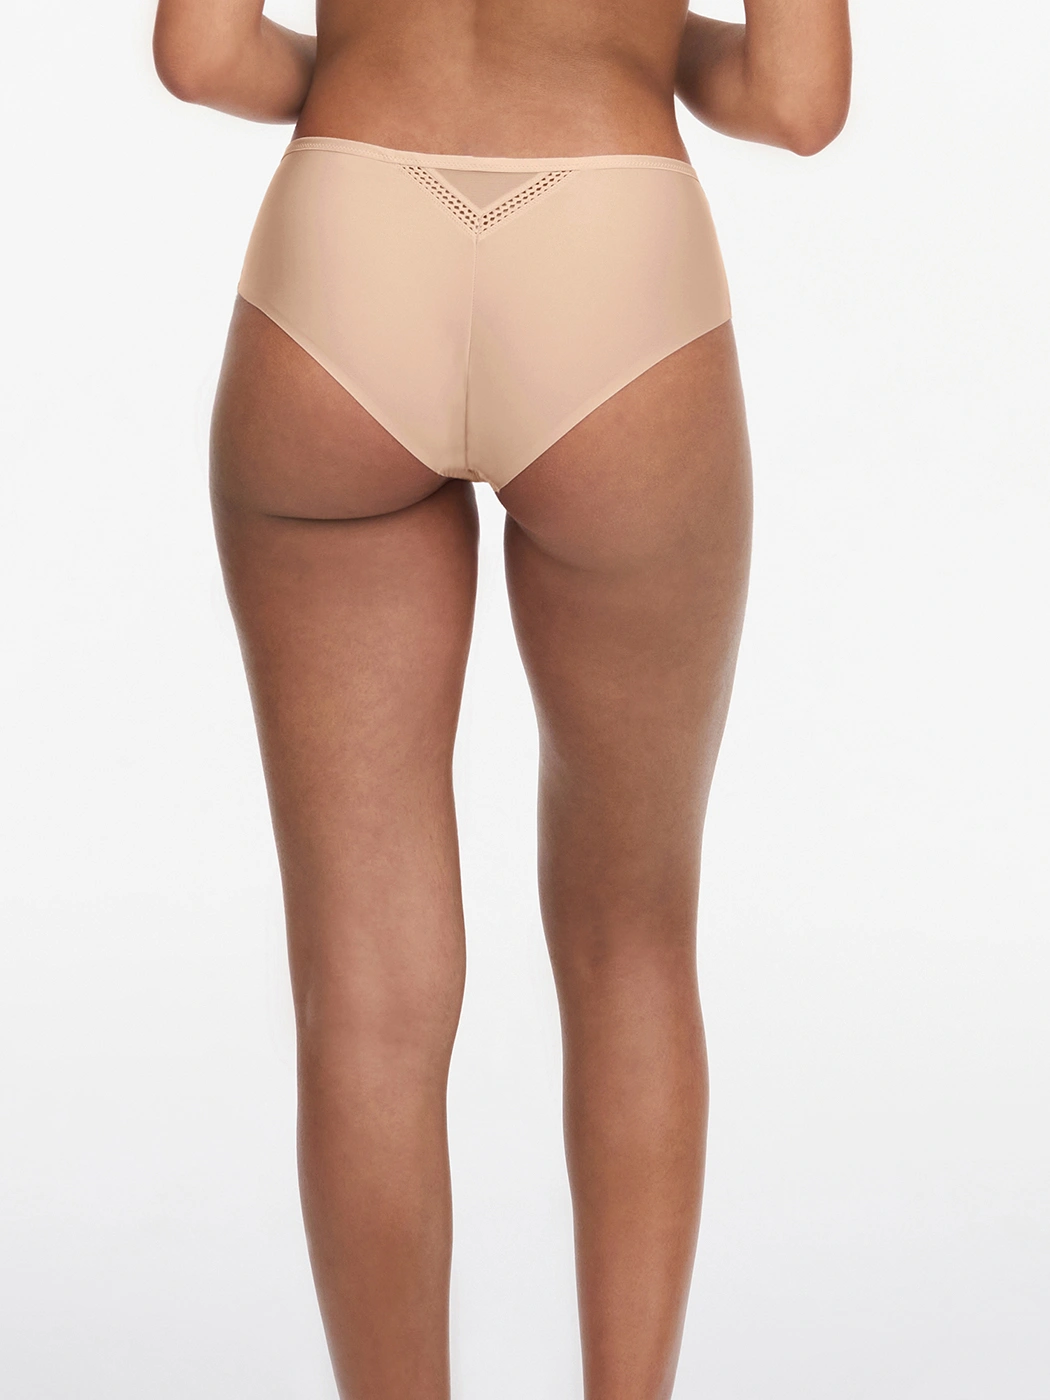 Chantelle - Chic Essential - Shorty, Panty